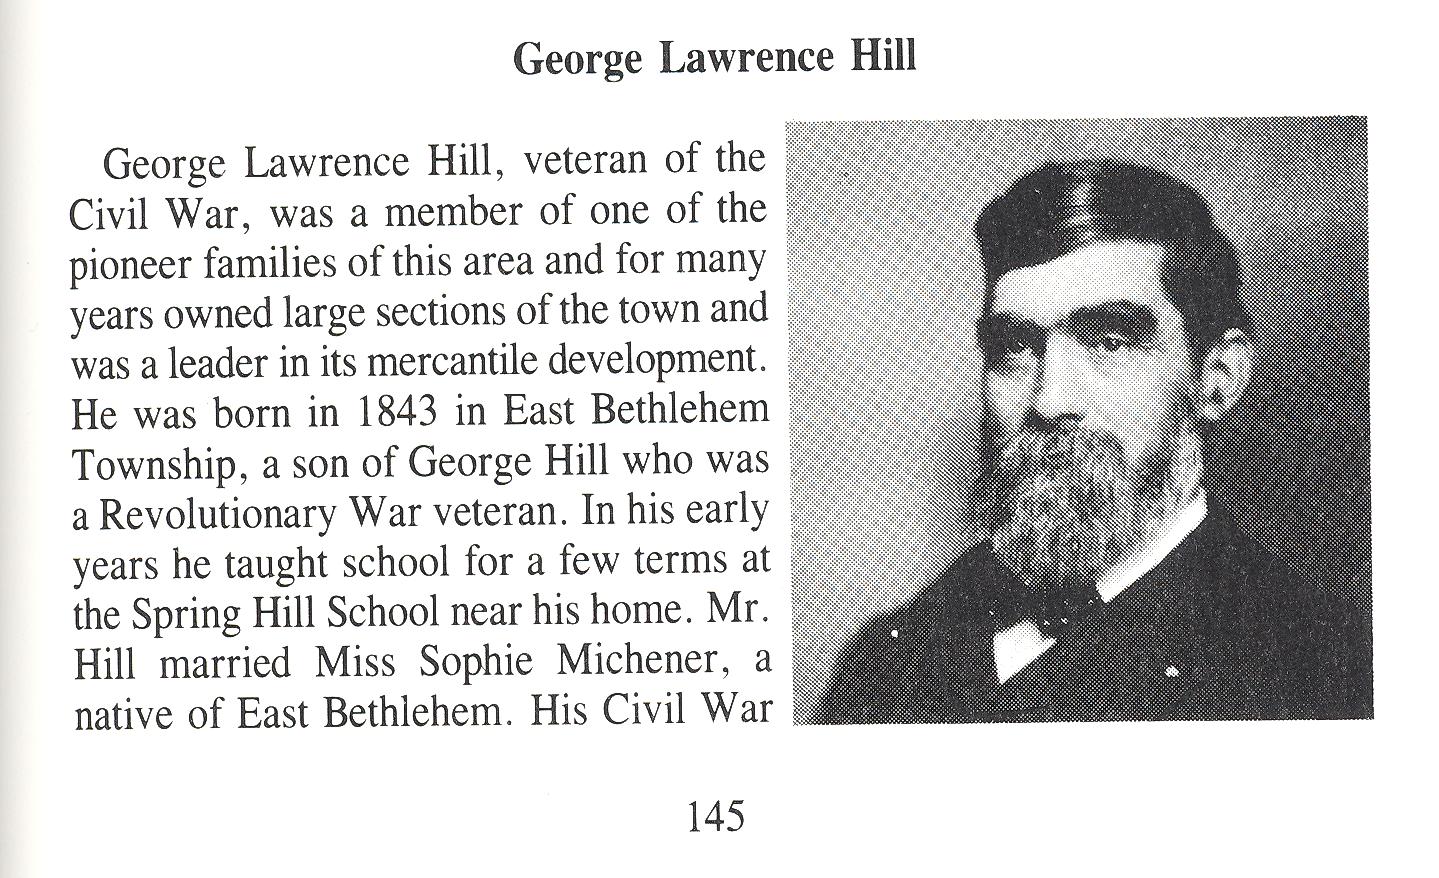 George Lawrence Hill